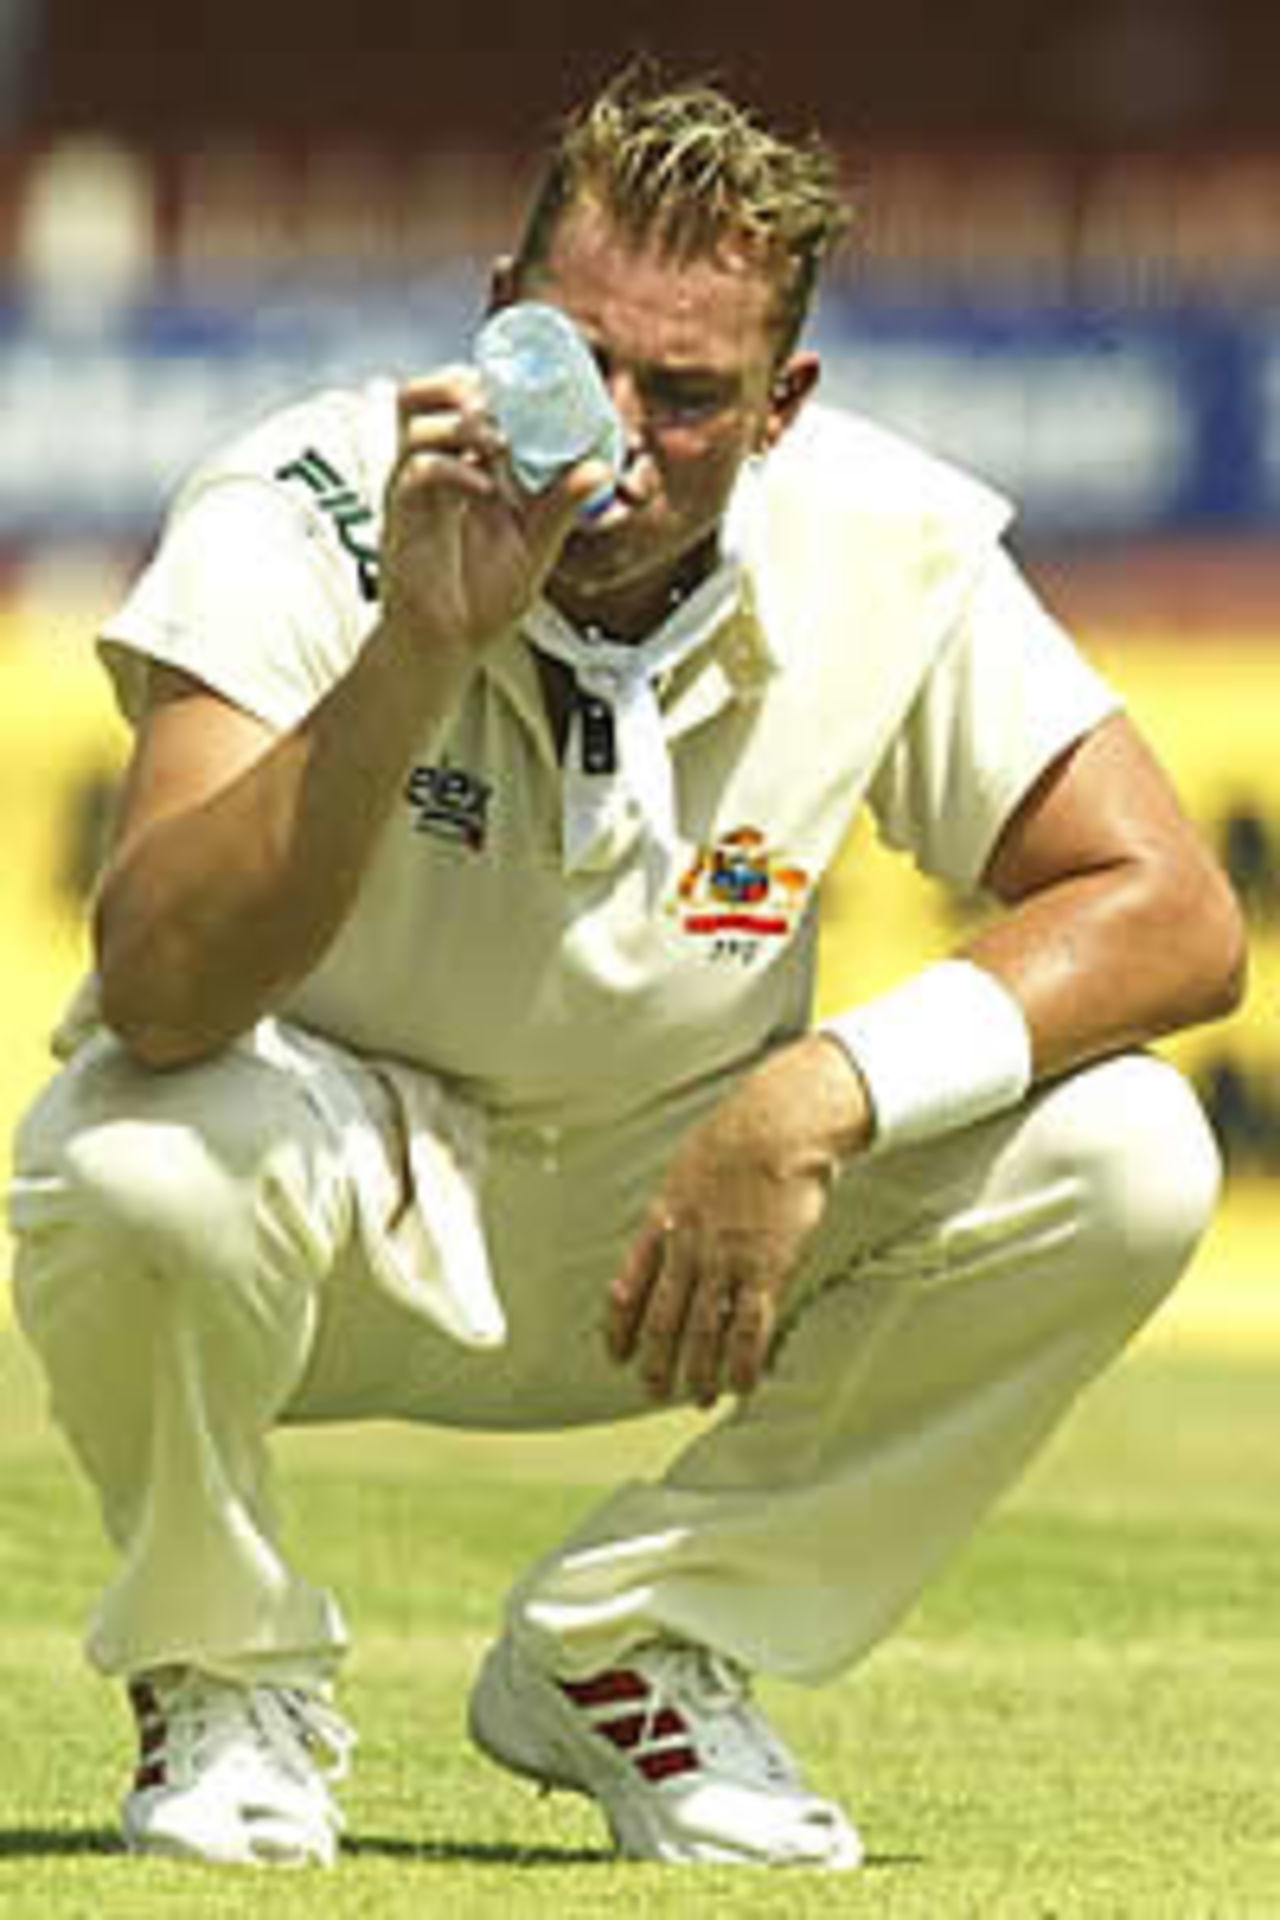 SHARJAH - OCTOBER 11: Shane Warne of Australia feels the heat, during day one of the Second Test between Pakistan and Australia, played at Sharjah International Cricket Stadium, Sharjah, United Arab Emirates on October 11, 2002.